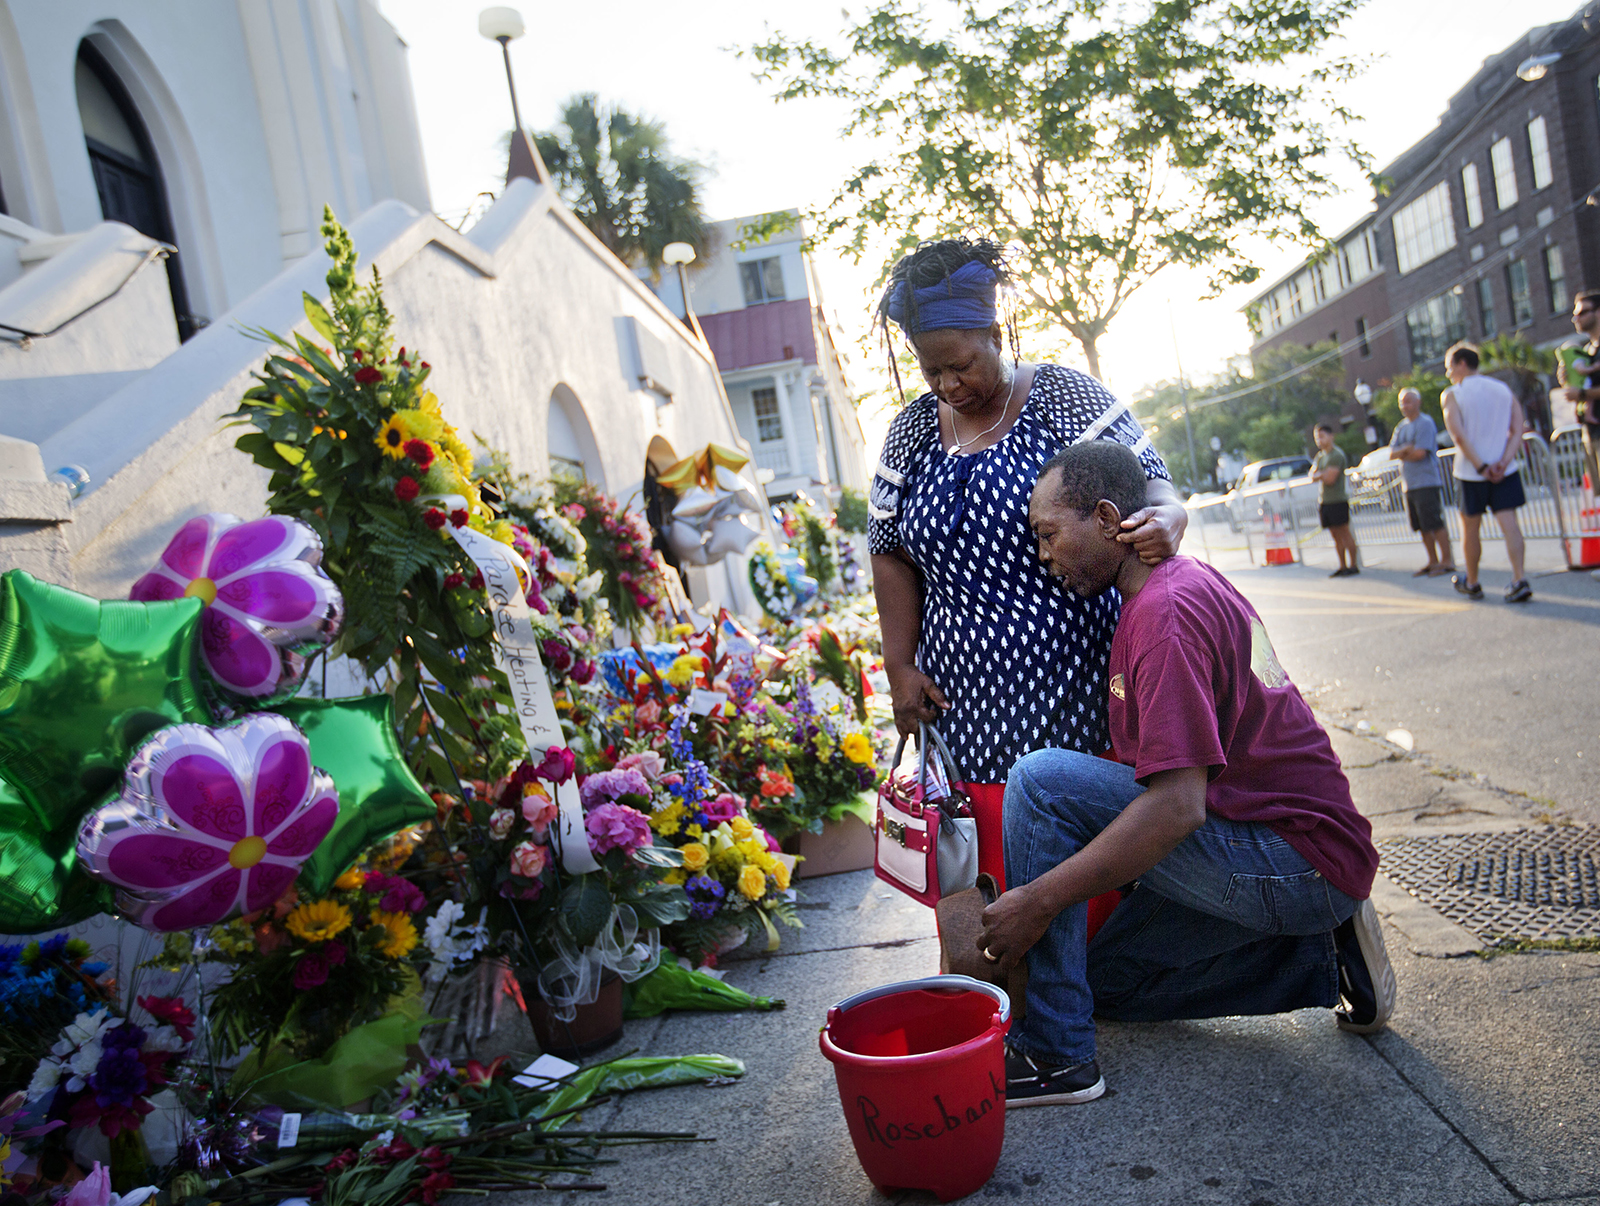 In this June 20, 2015, file photo, Allen Sanders, right, kneels next to his wife, Georgette, both of McClellanville, South Carolina, as they pray at a sidewalk memorial in memory of the shooting victims in front of Mother Emanuel AME Church in Charleston, South Carolina. (AP Photo/David Goldman, File)